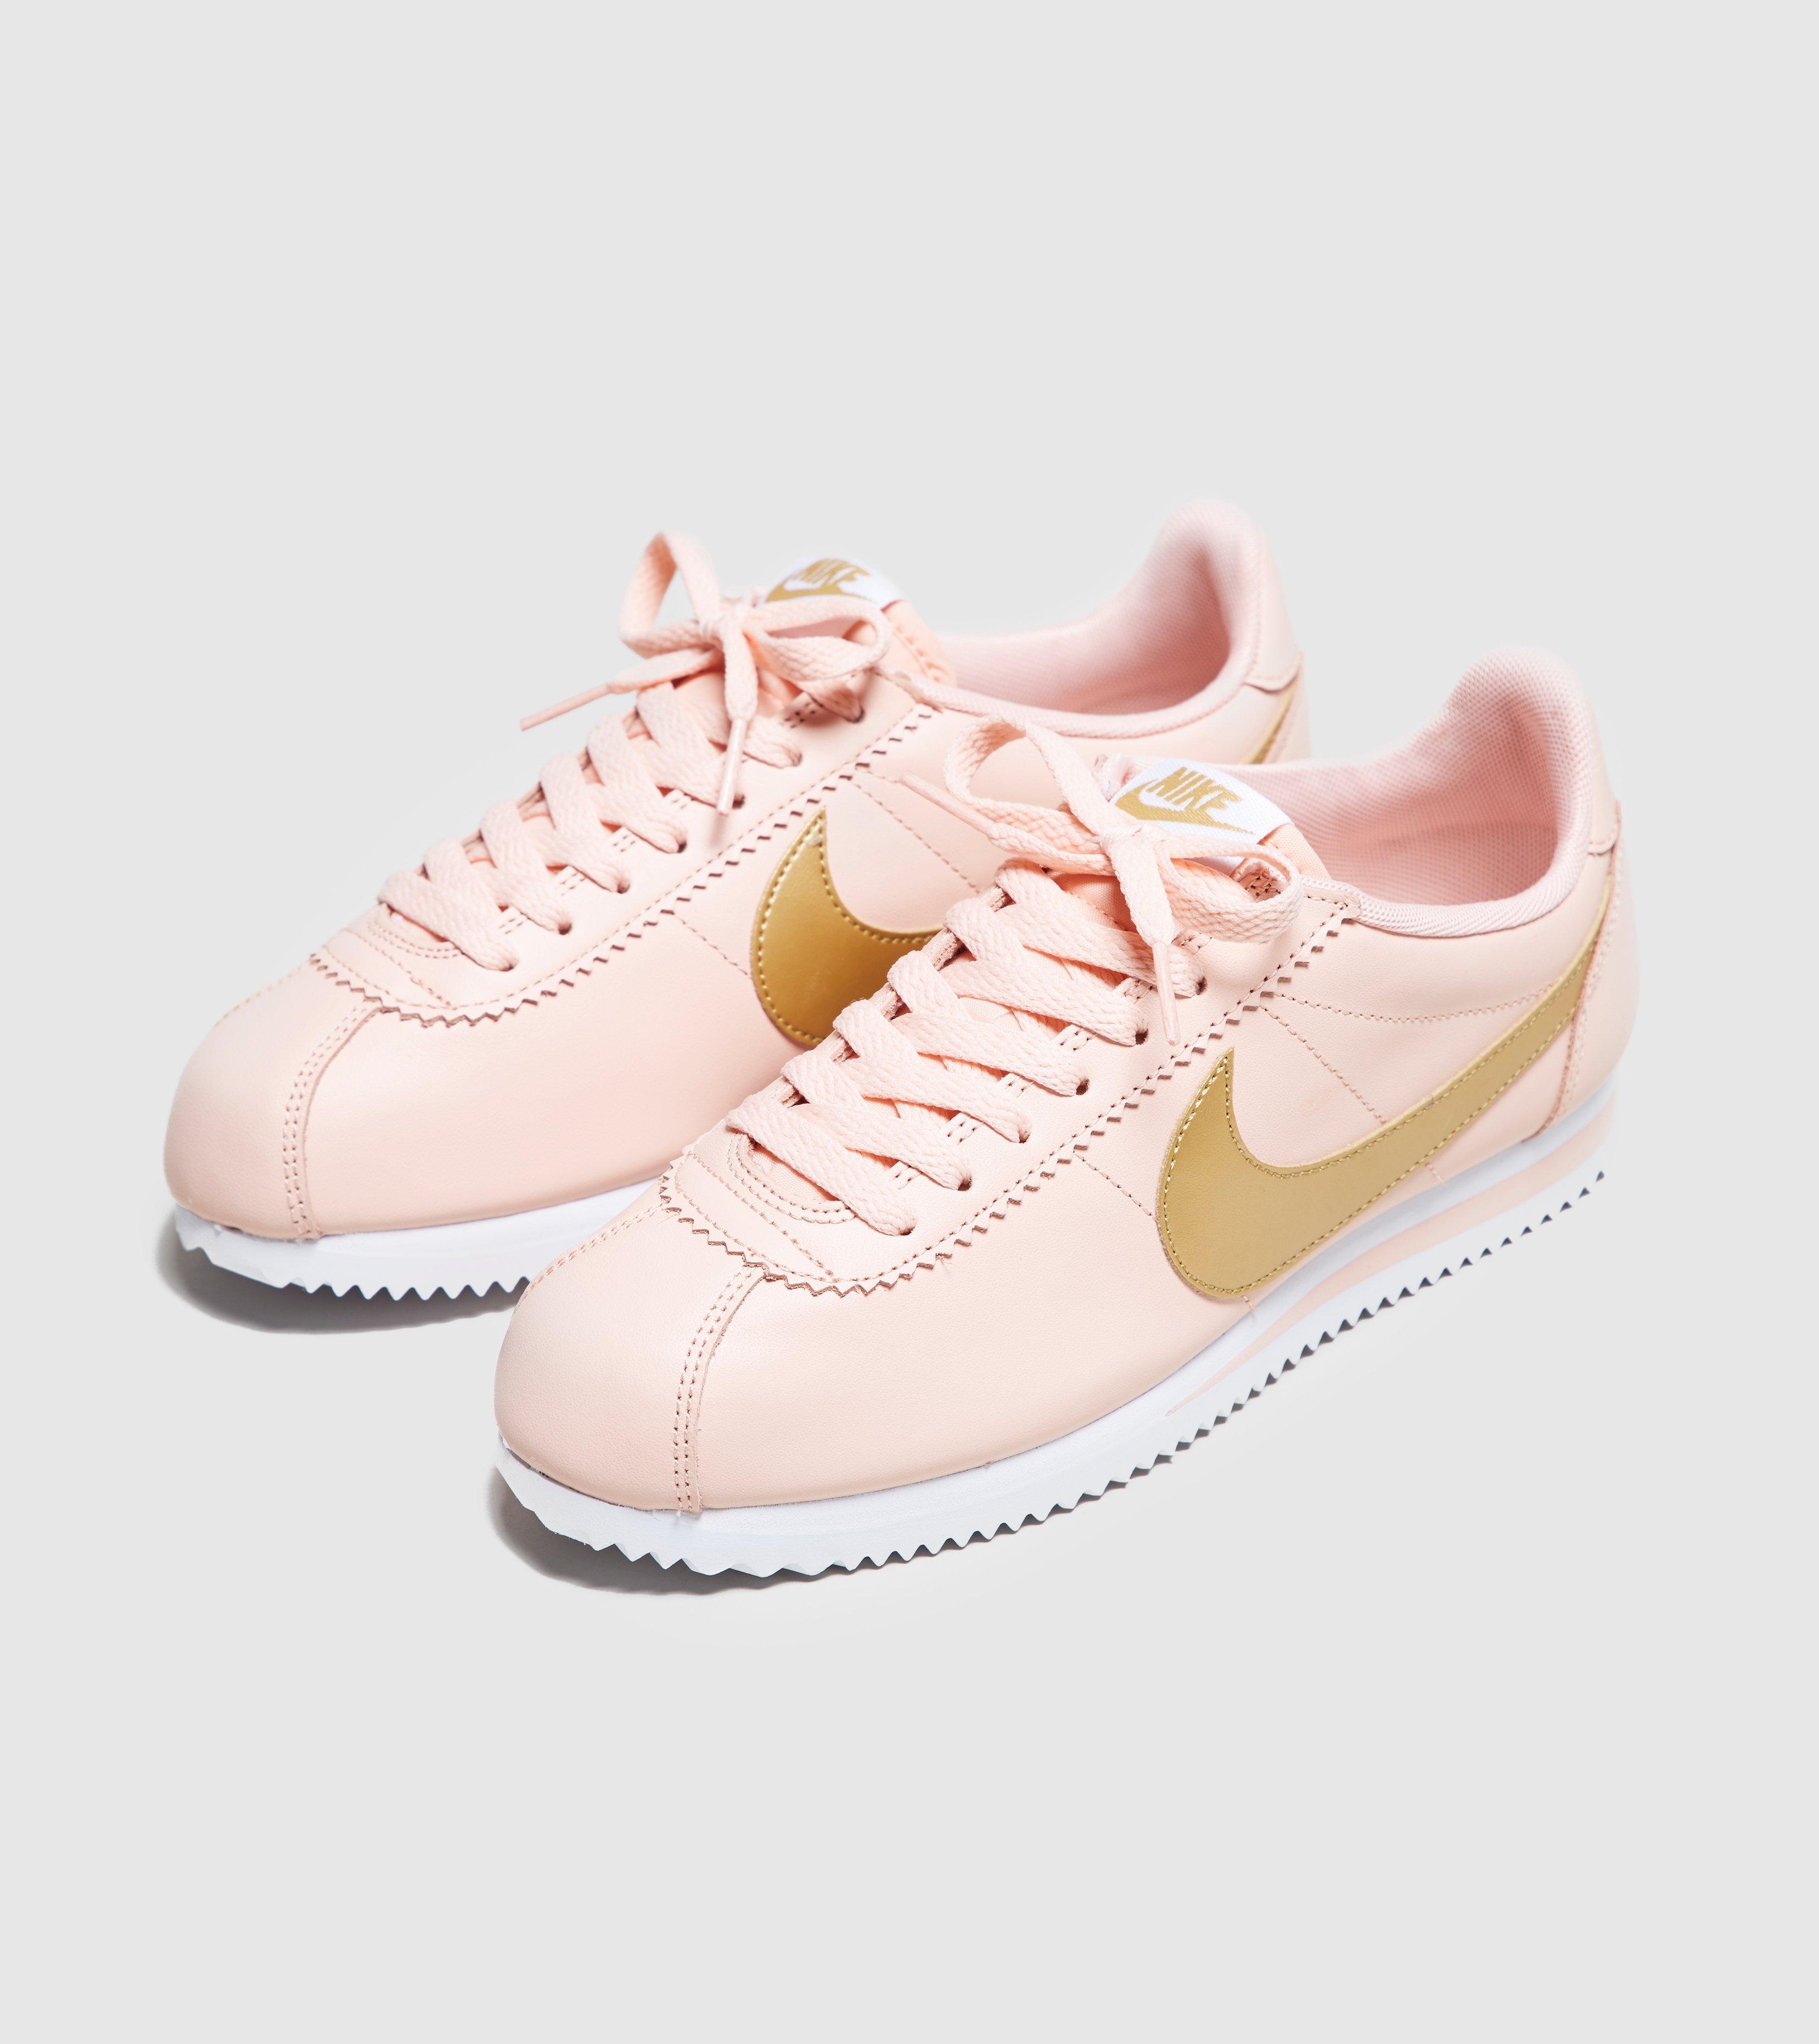 cortez pink and gold